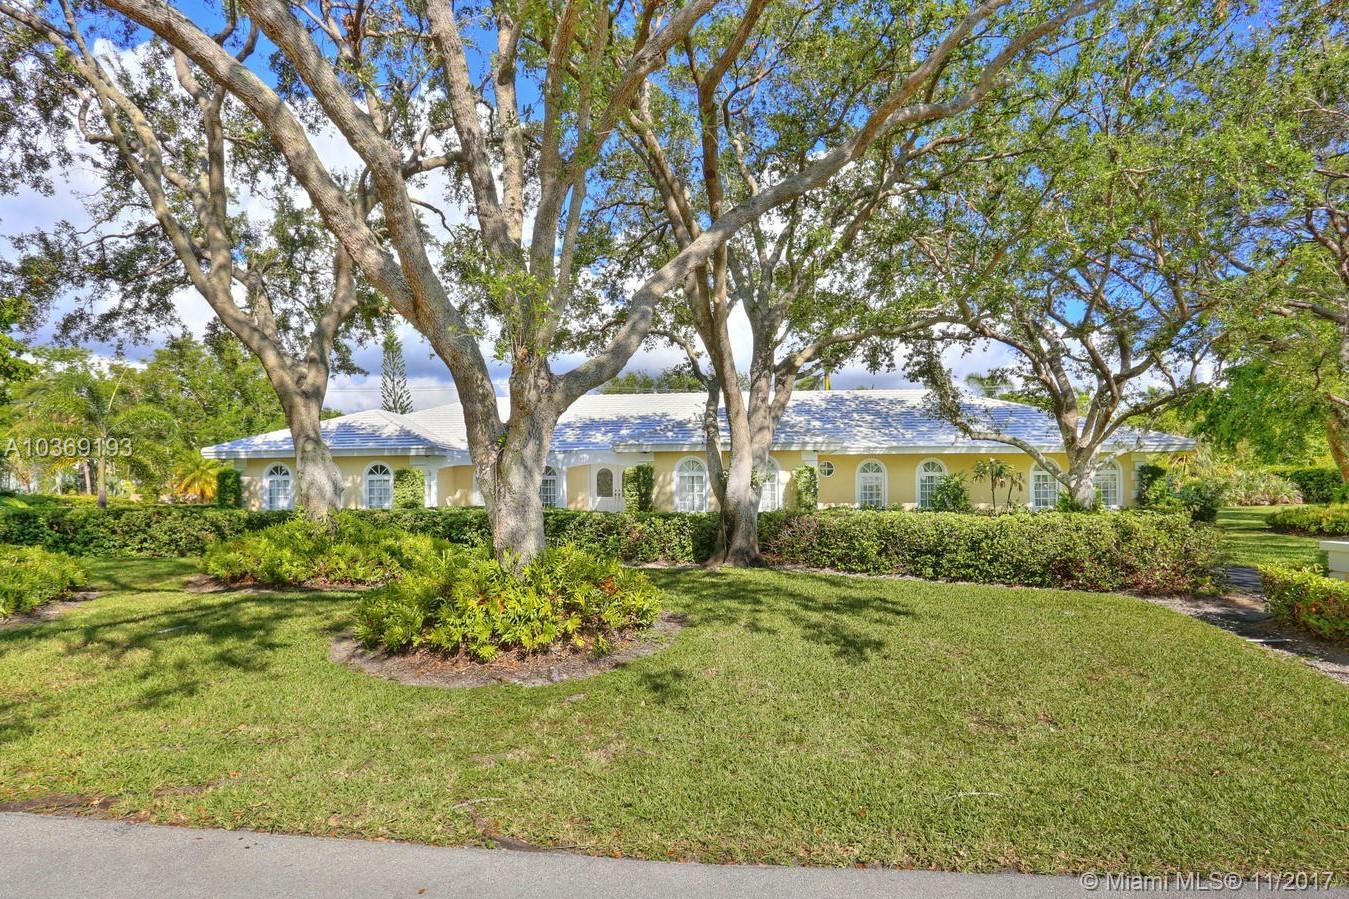 Photo 1 of 5901 Sw 116th St, Coral Gables, Florida, $1,450,000, Web #: 10369193